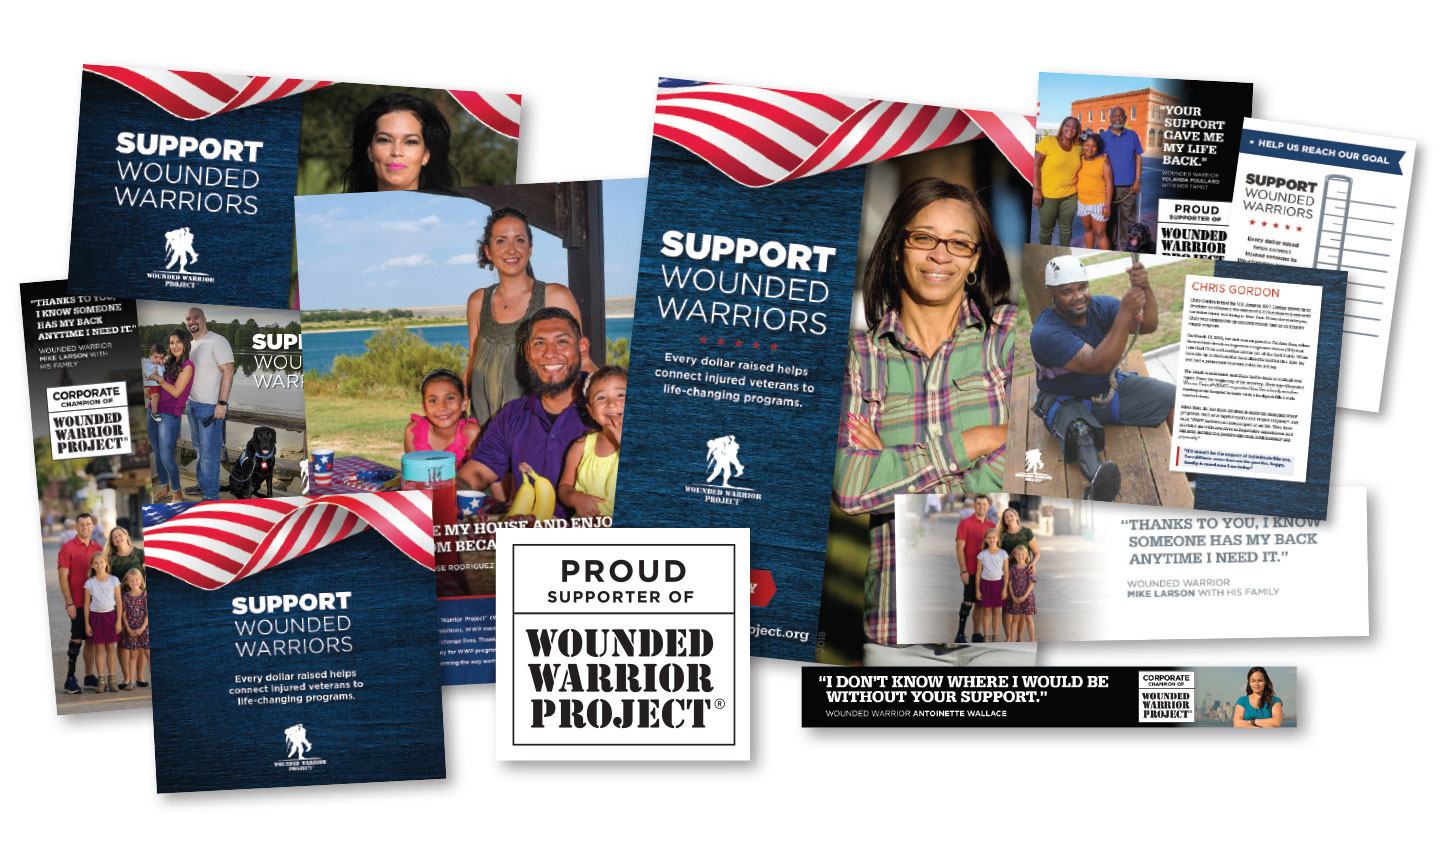 Corporate Supporter marketing assets and collateral collage